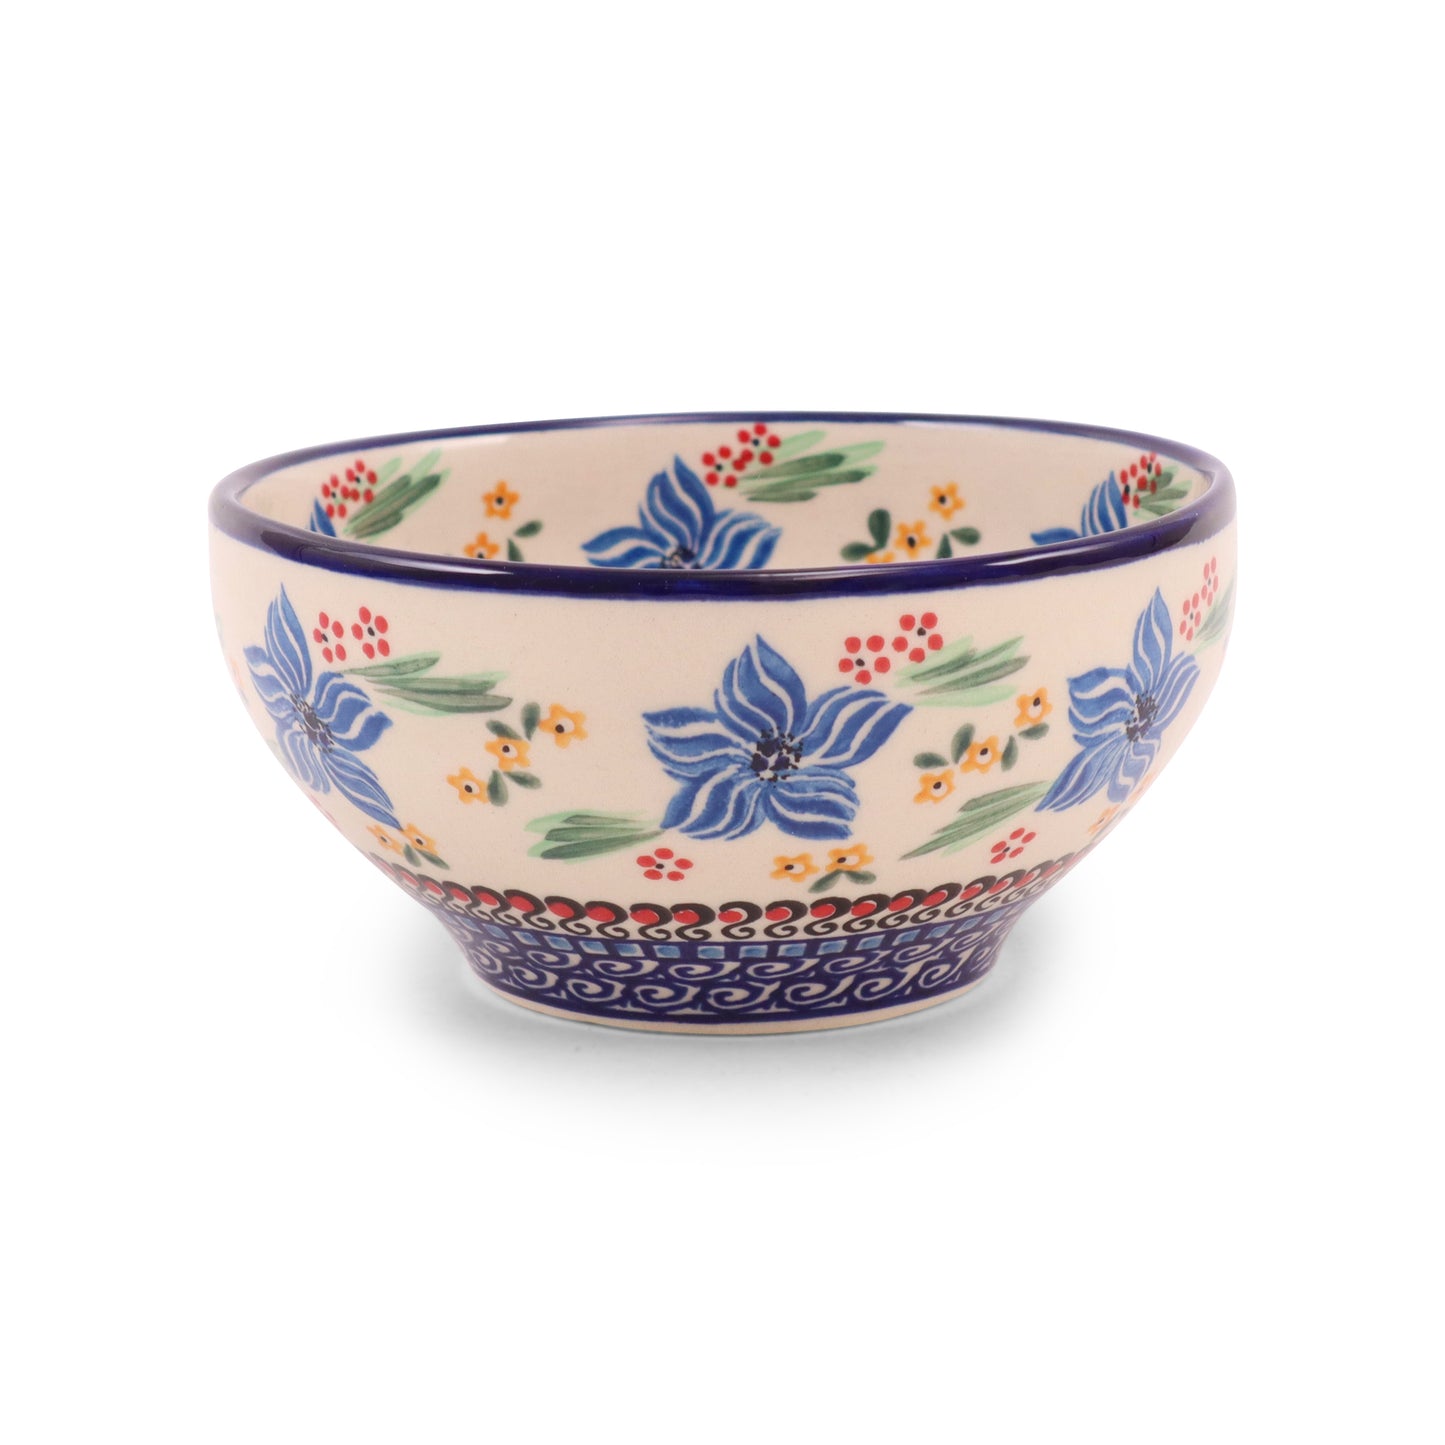 6" Cereal Bowl. Pattern: B61